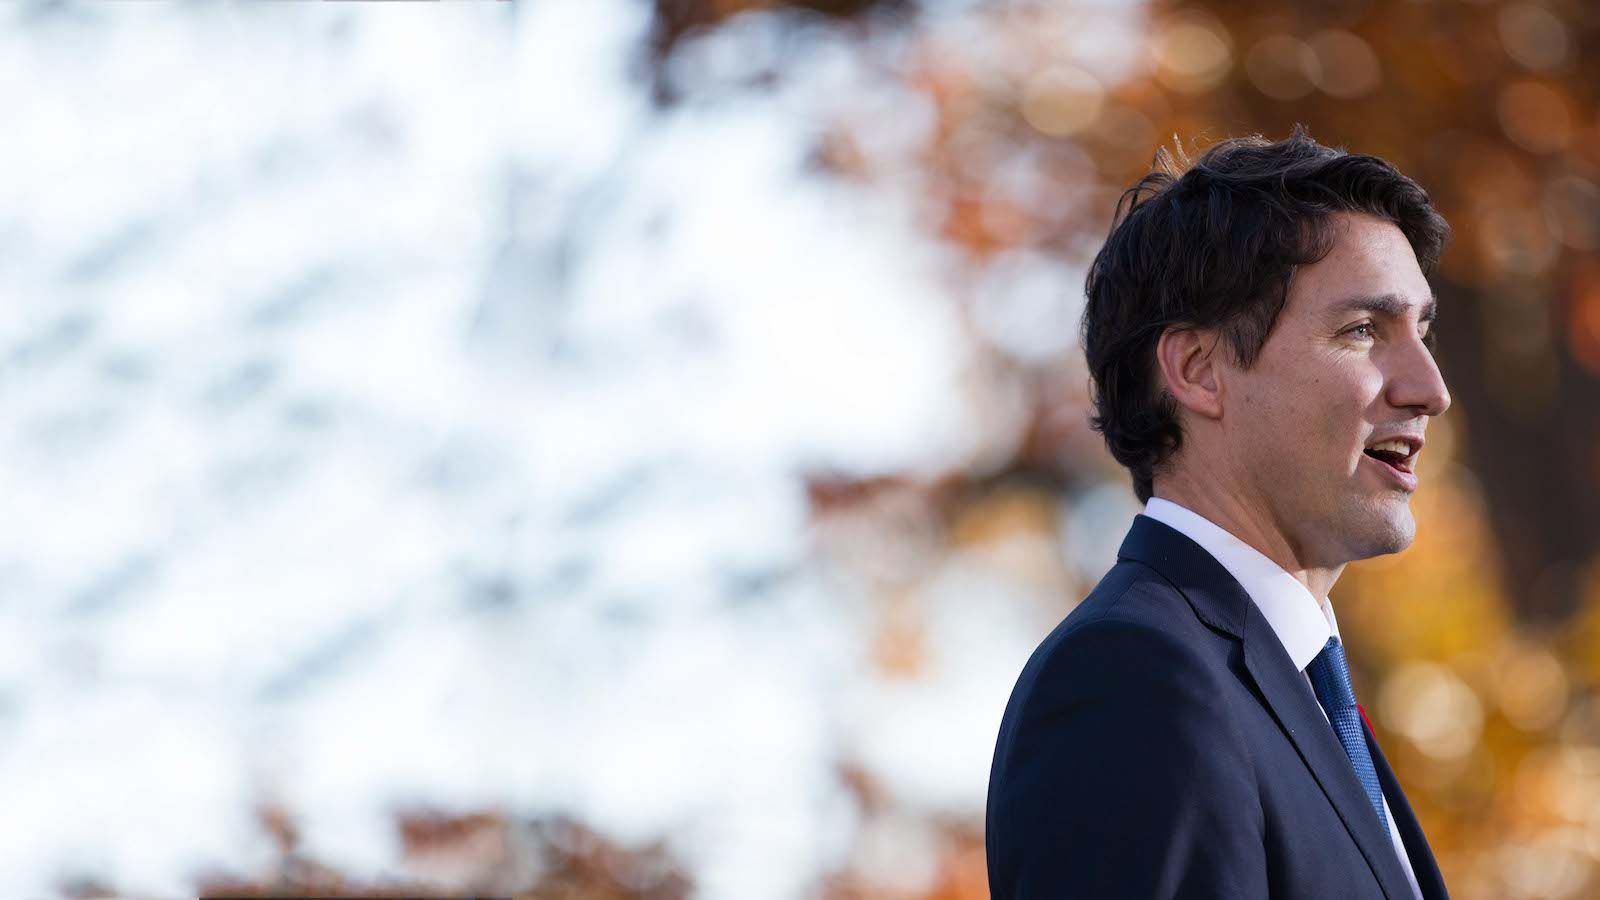 We've covered Justin Trudeau all his life. Here's his story